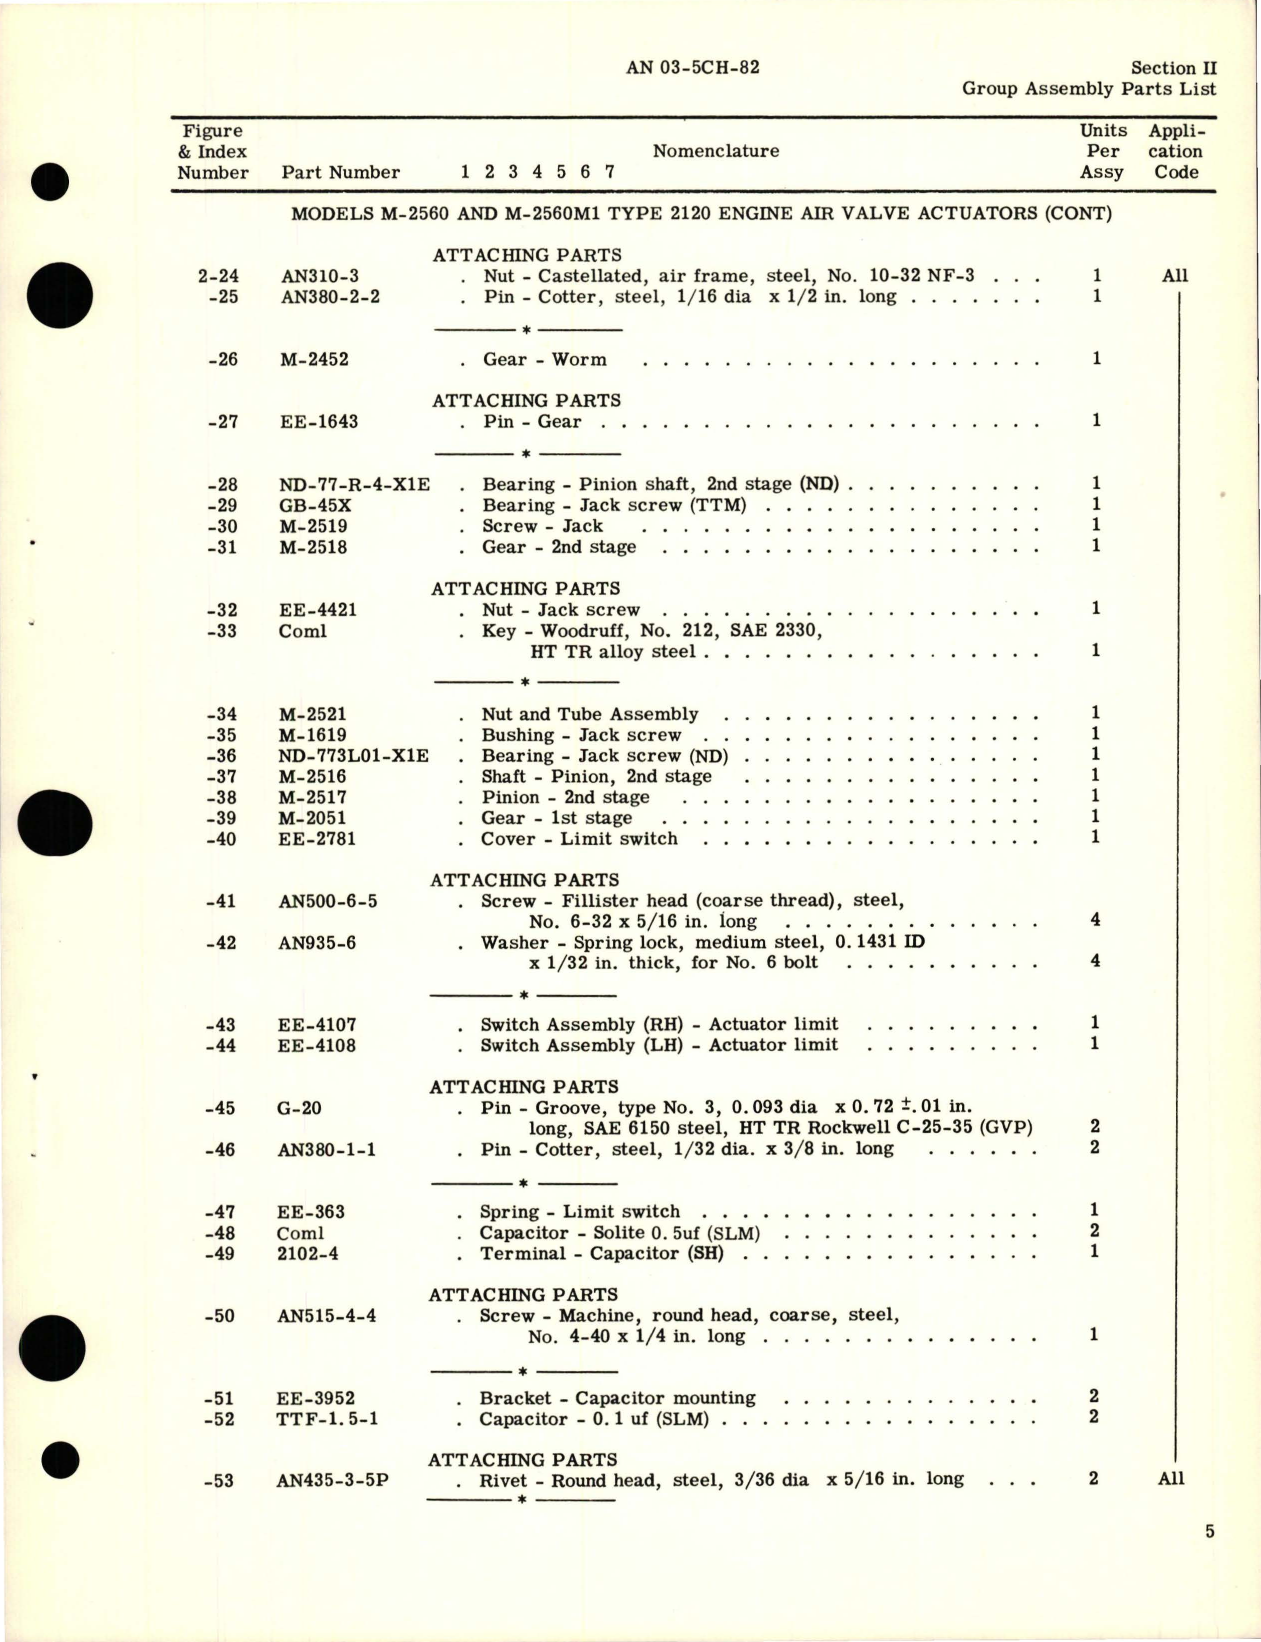 Sample page 9 from AirCorps Library document: Parts Catalog for Engine Air Valve Actuator - Models M-2560, M-2560MI, M-2560MIA, and M-2560M3